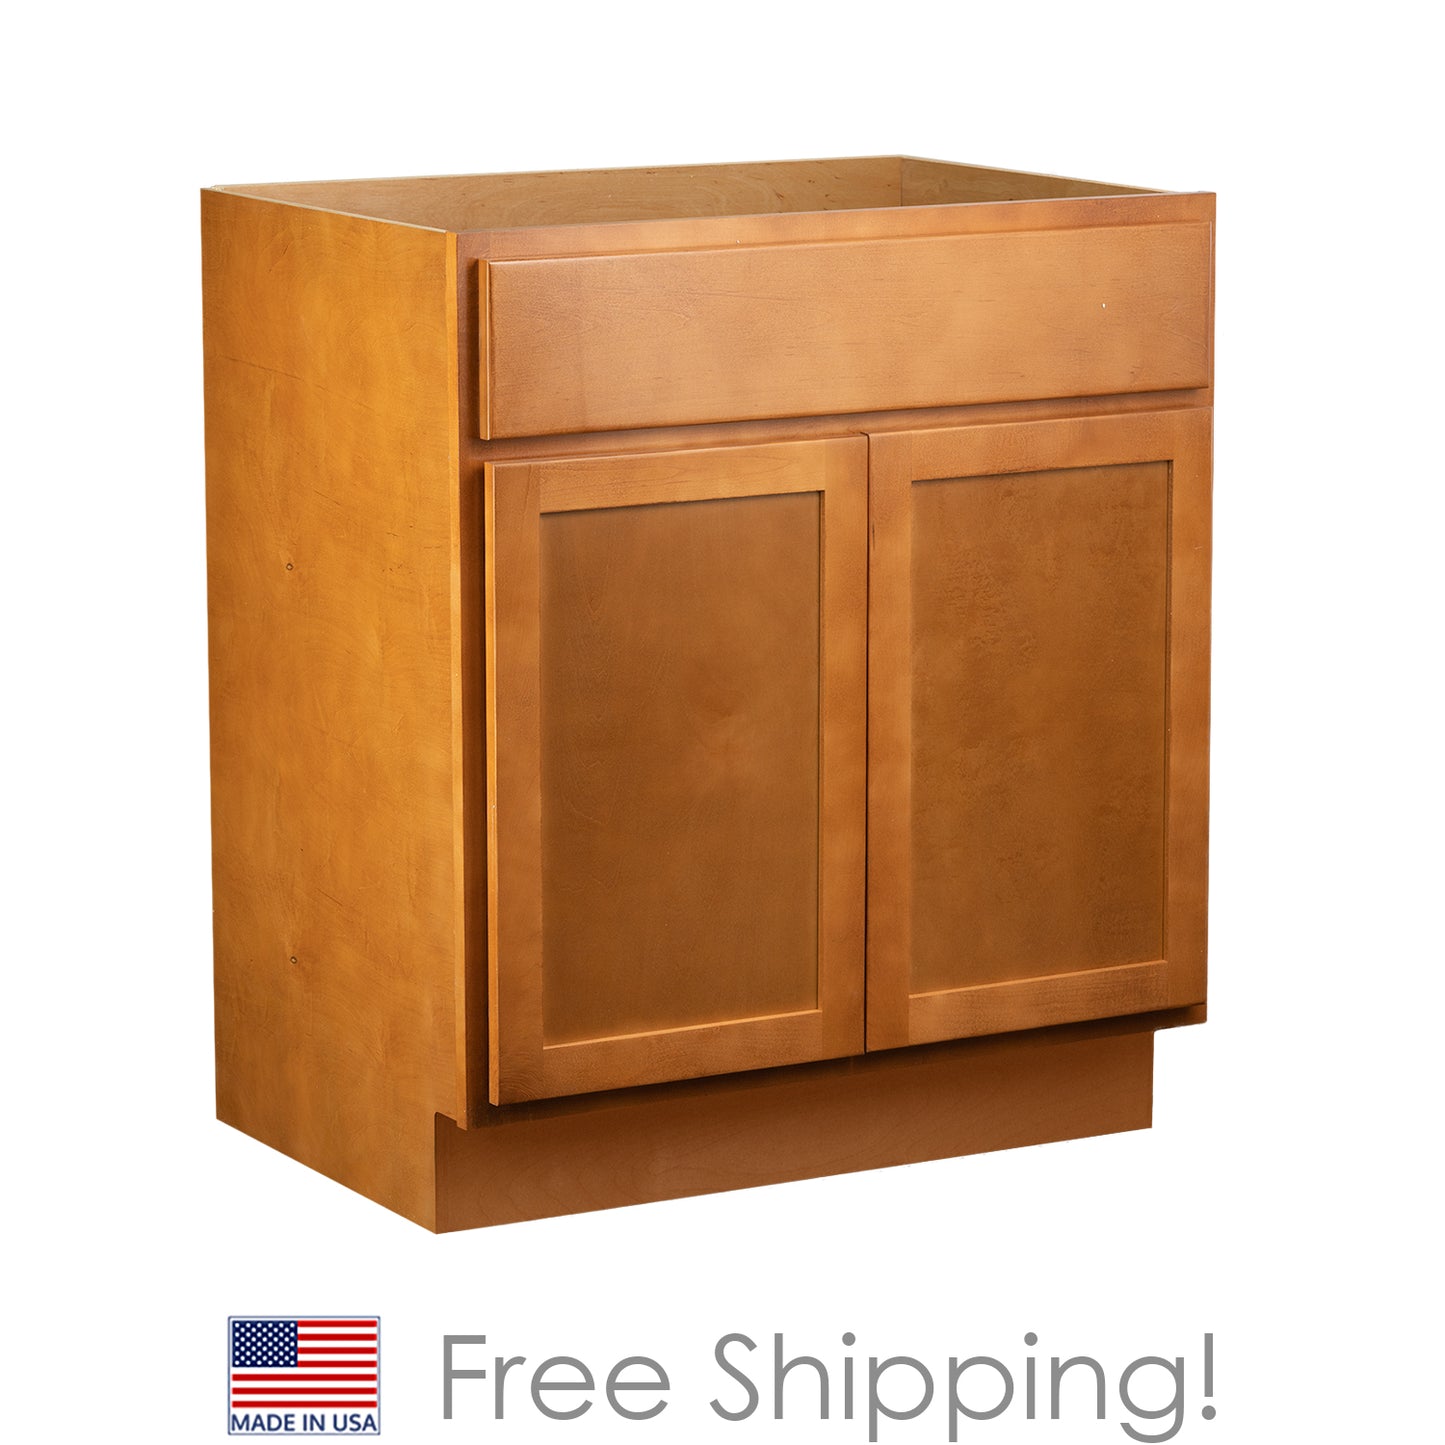 Quicklock RTA (Ready-to-Assemble) Provincial Stain Vanity Base Cabinet | 36"Wx34.5"Hx18"D